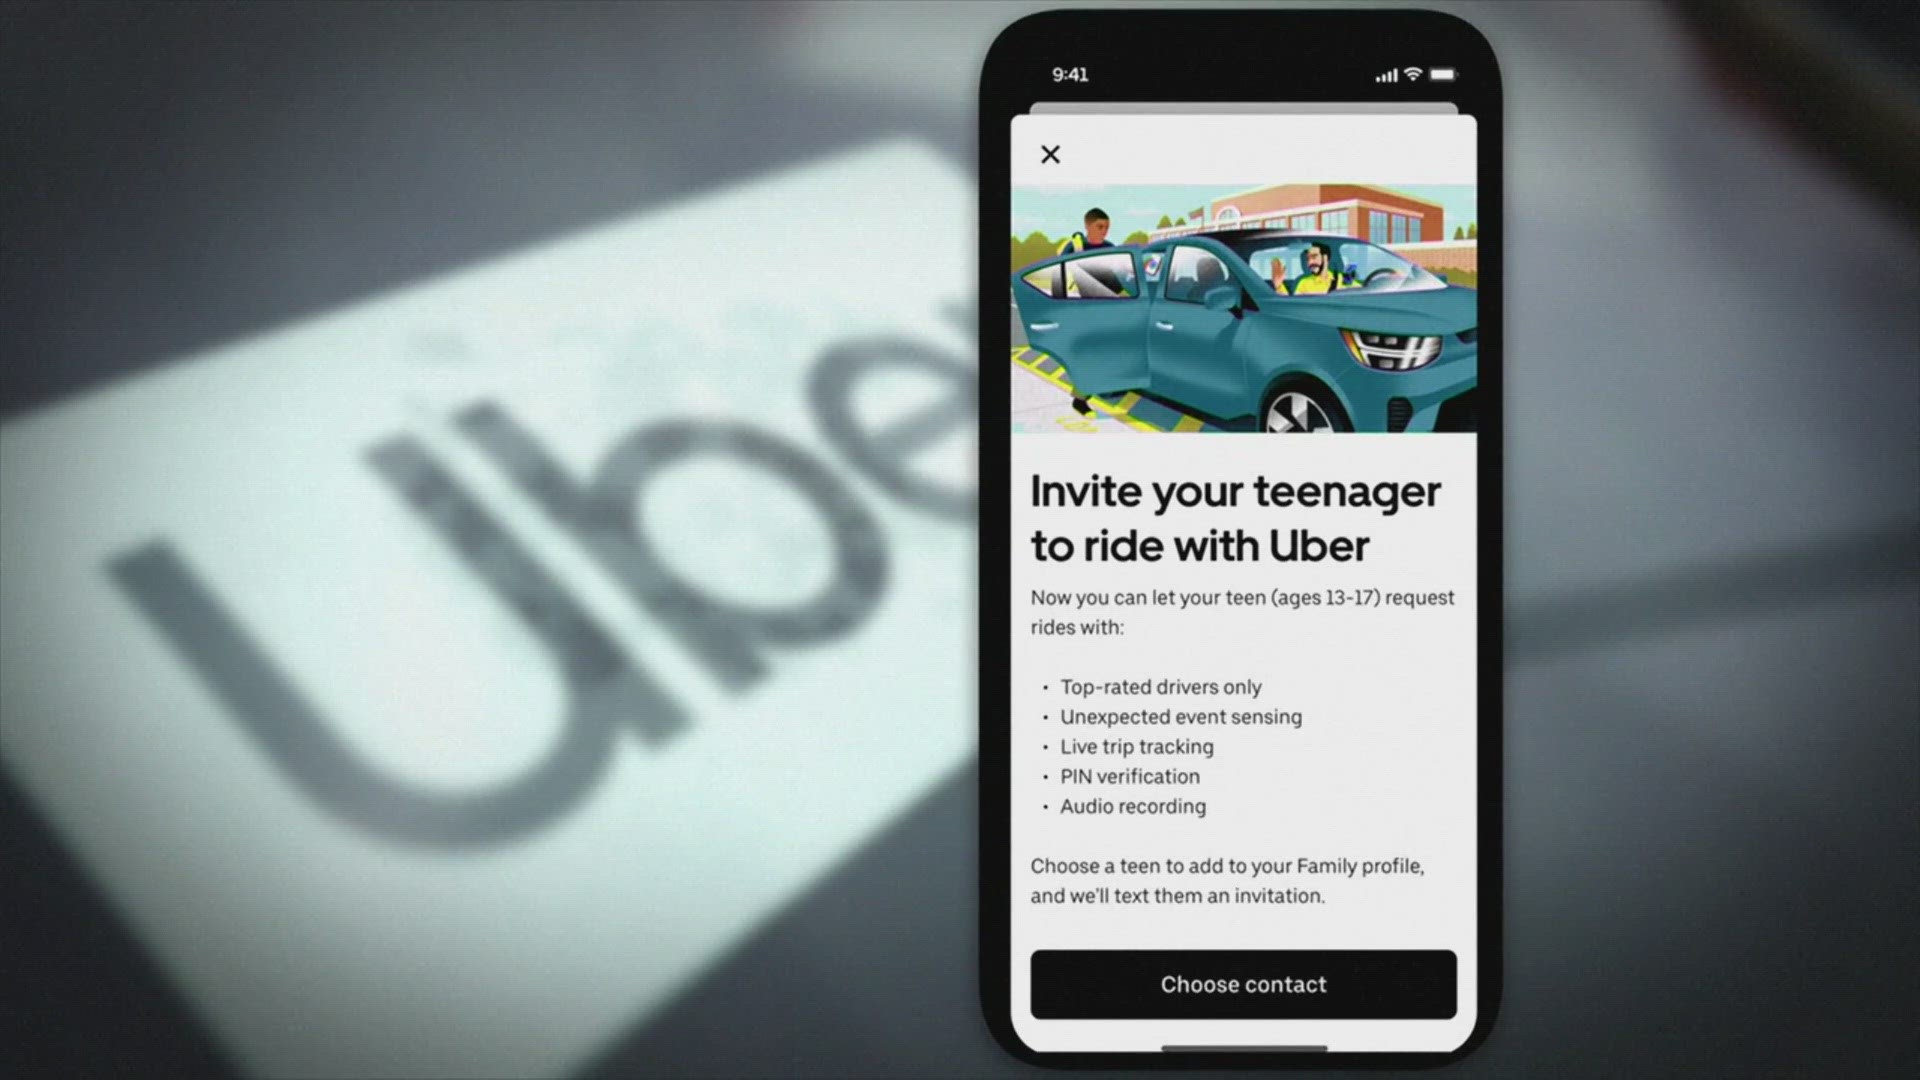 Dallas is one of 13 other cities where Uber will allow teens to call their own rideshare.